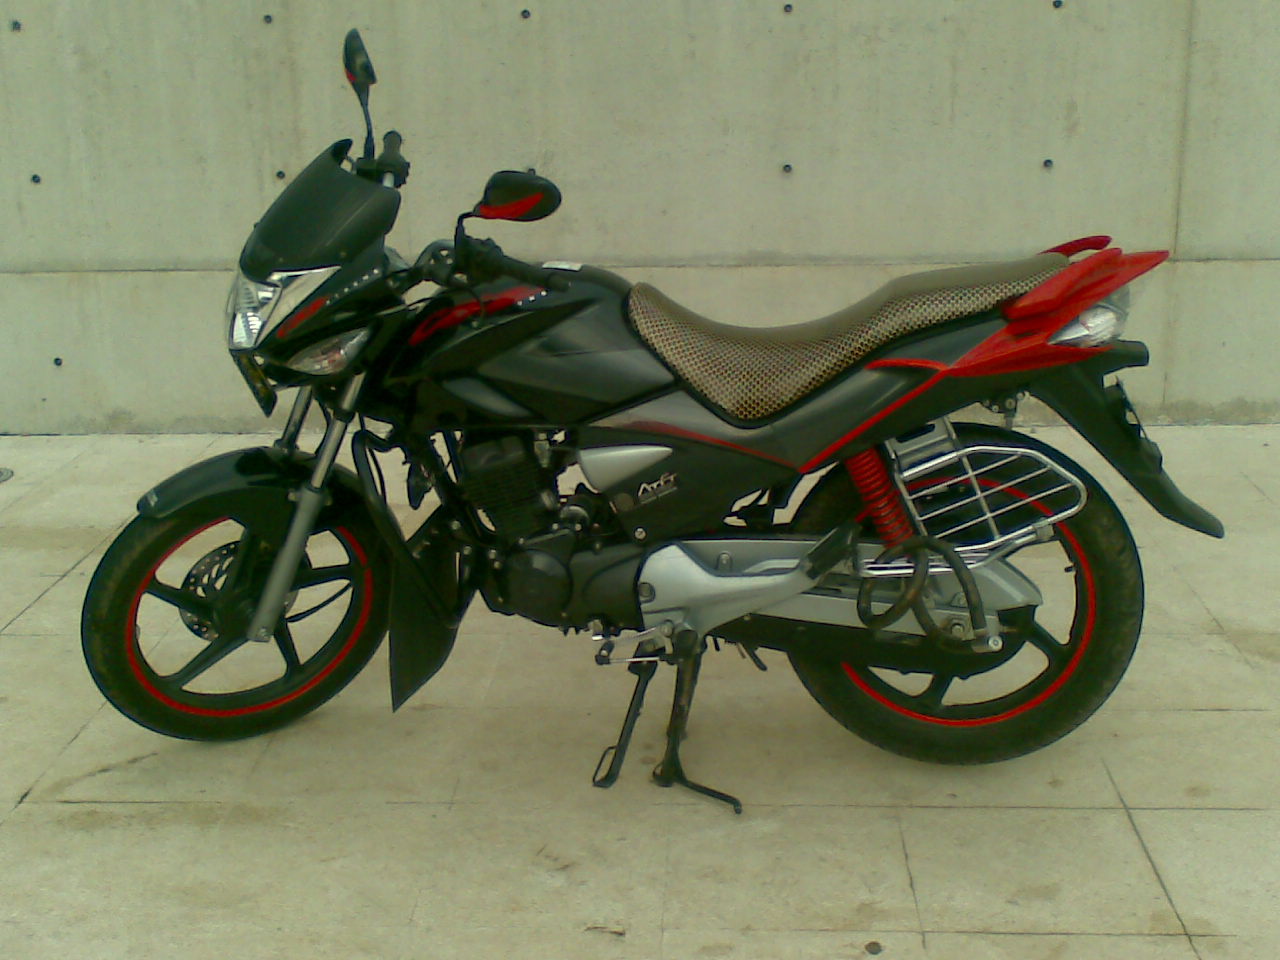 Hero Honda CBZ extreme 150 cc bike. its in a show room condi large image 0